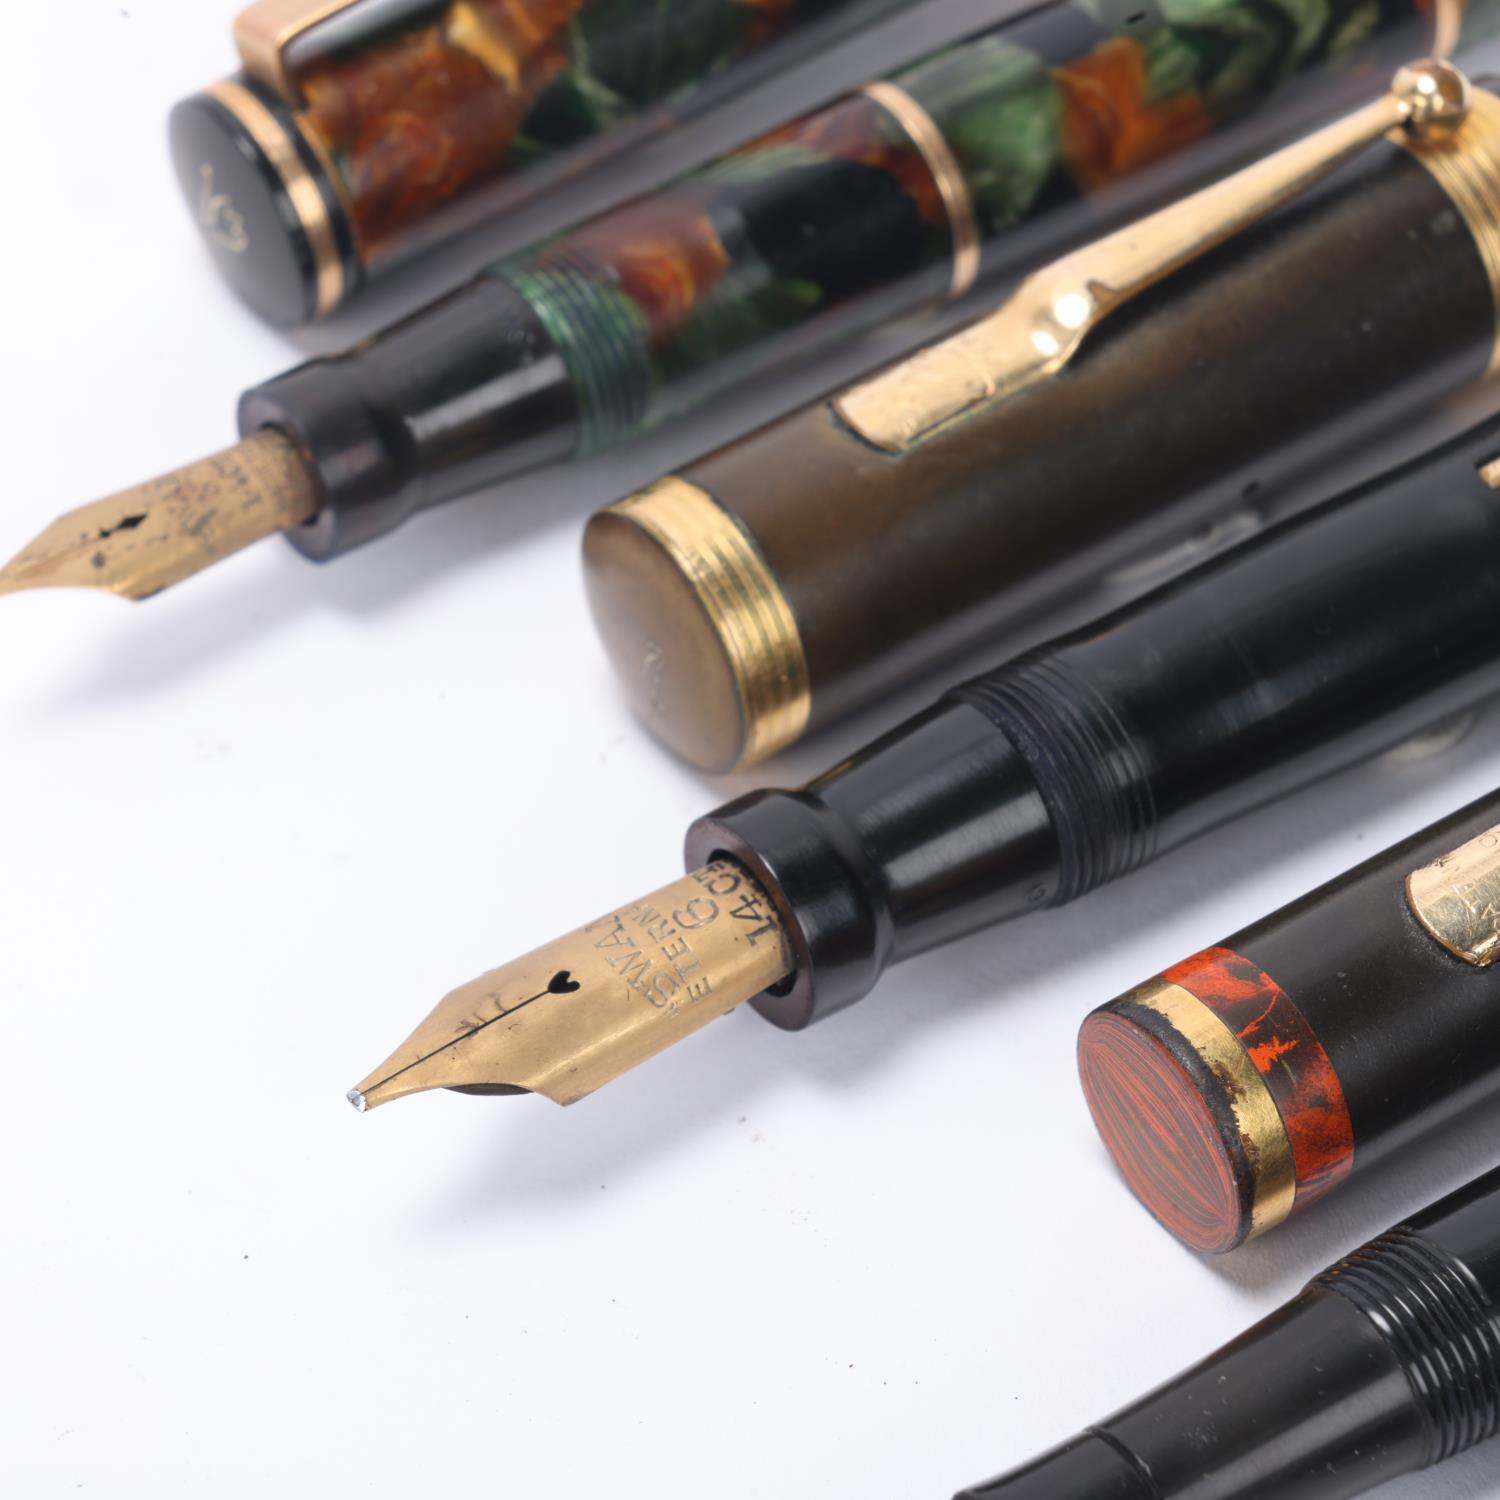 6 vintage Mabie, Todd & Co / Swan fountain pens, models include, Leverless, Self-Filler, Eternal, - Image 4 of 4